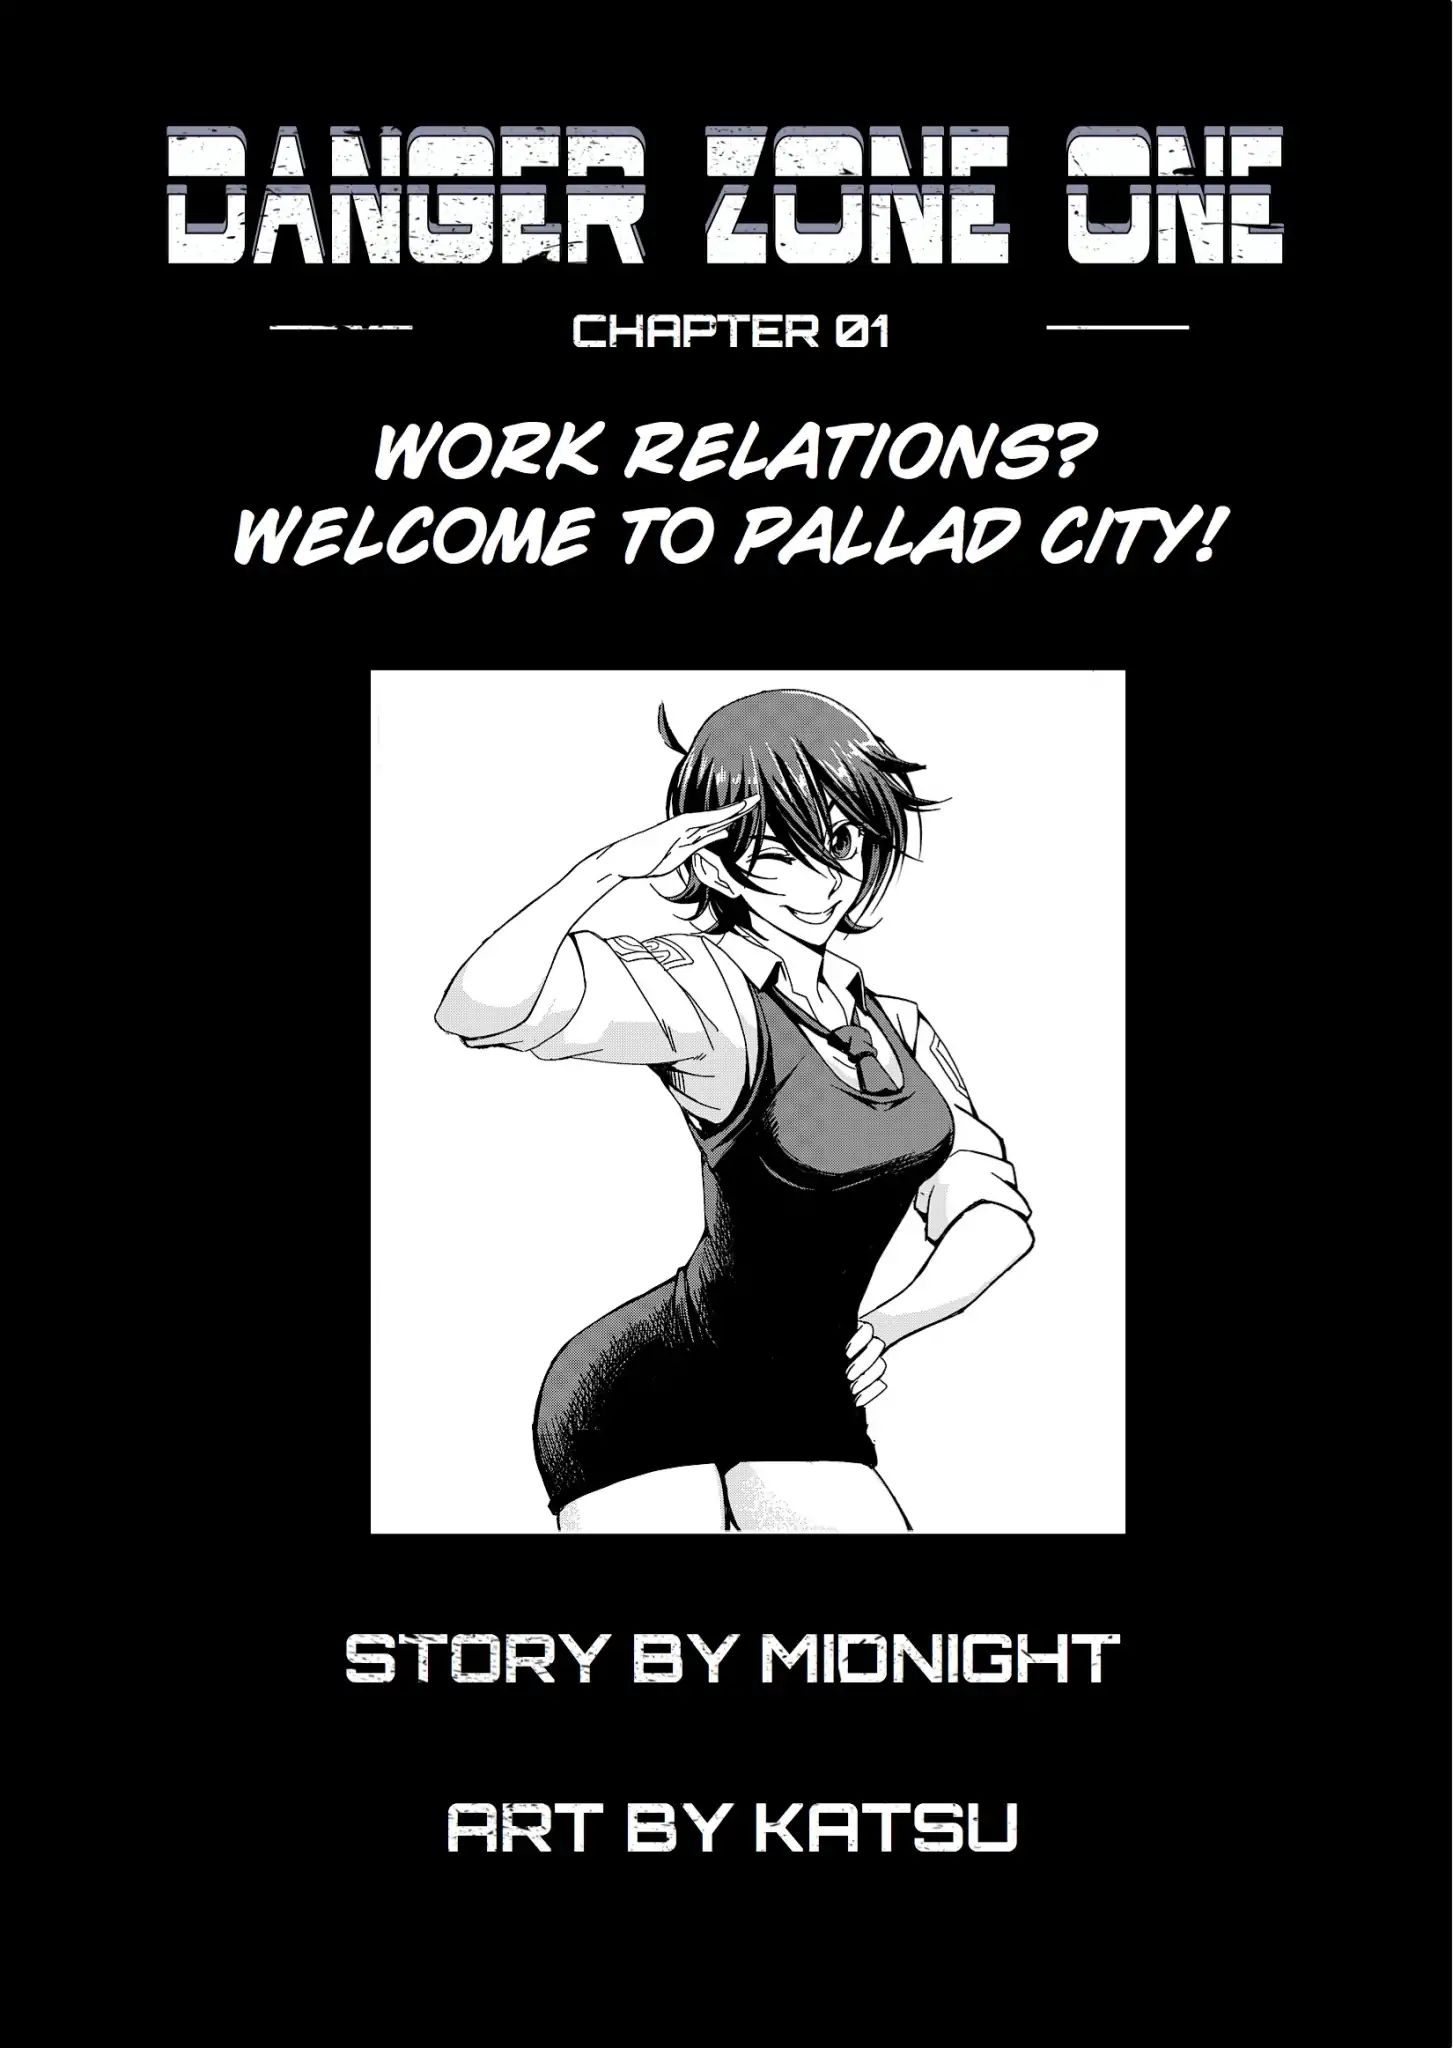 Danger Zone One Chapter 01: Welcome To Pallad City! - Picture 2